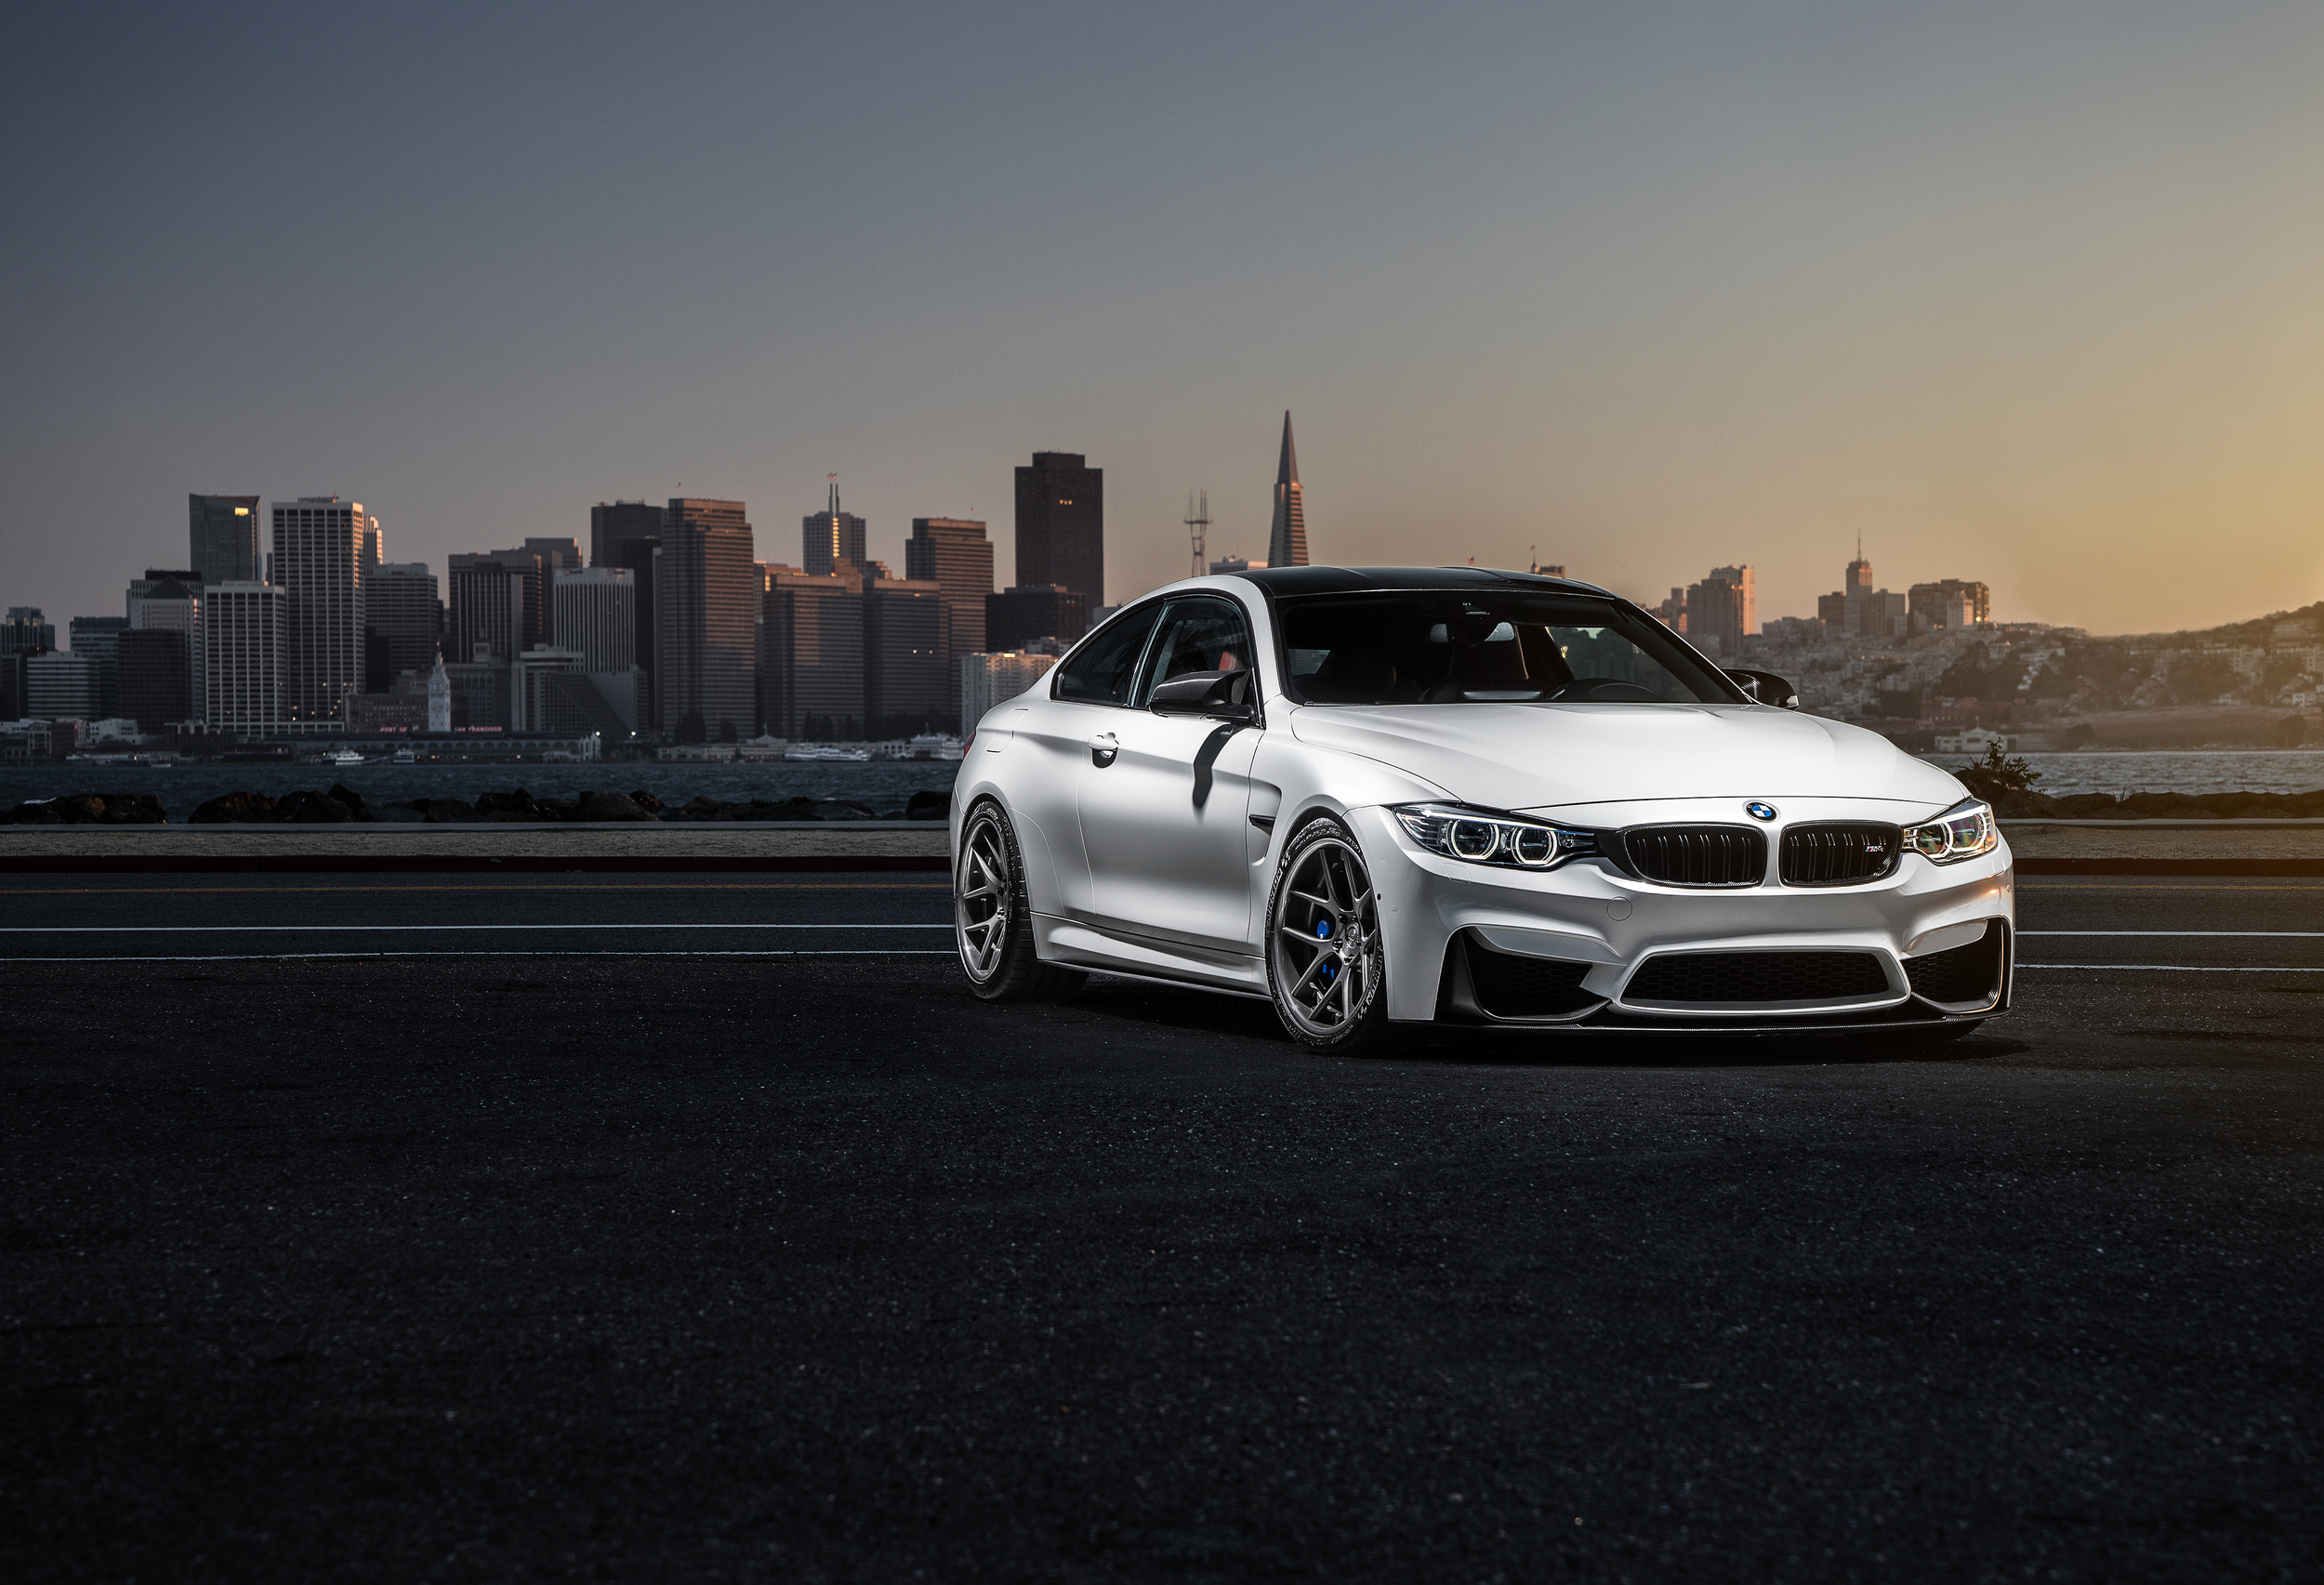 100572 download wallpaper bmw, cars, white, front view, m4, f82 screensavers and pictures for free